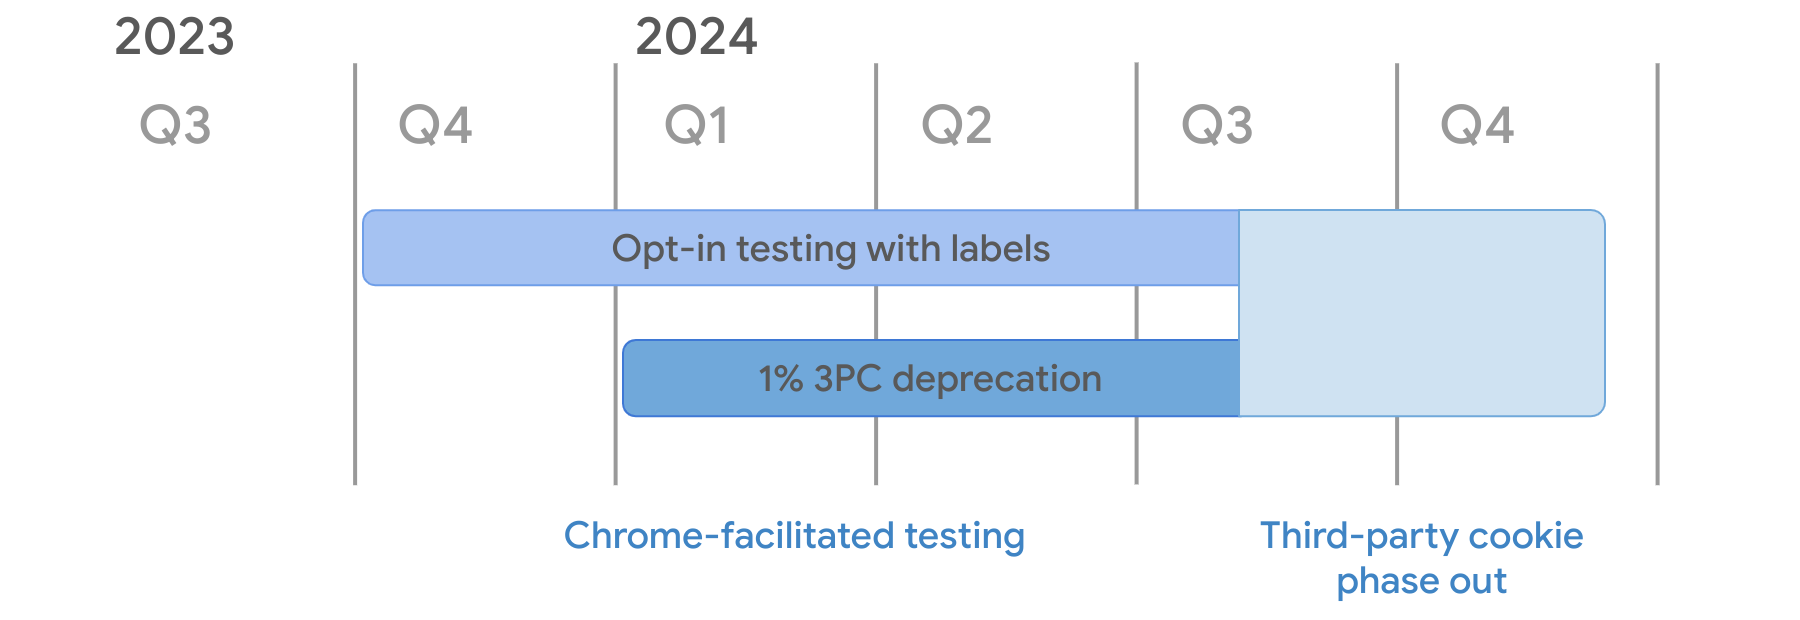 Timeline for third-party cookie depraction. As part of Chrome-facilitated testing, the opt-in testing with labels mode starts in Q4 2023 and the 1% 3PC deprecation mode starts in Q1 2024. Both continue through to mid-Q3 2024 when the third-party cookie phaseout starts.